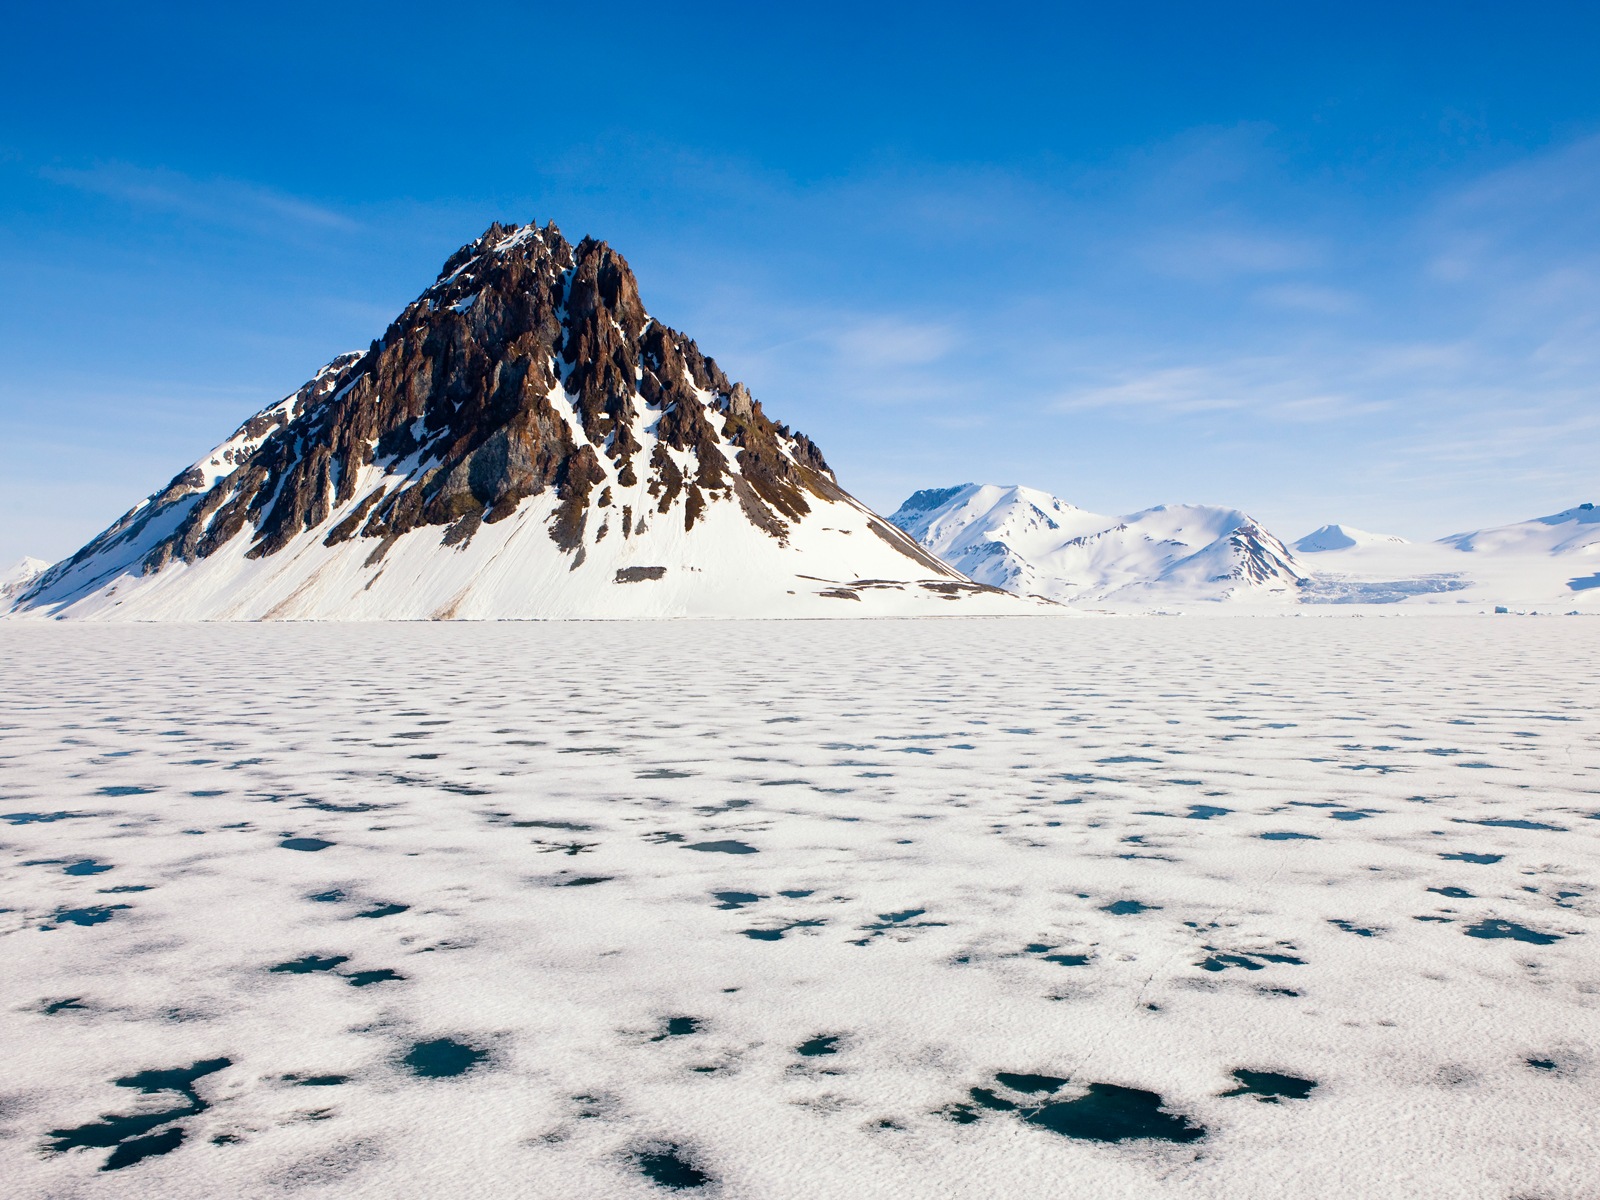 Windows 8 Wallpapers: Arctic, the nature ecological landscape, arctic animals #1 - 1600x1200